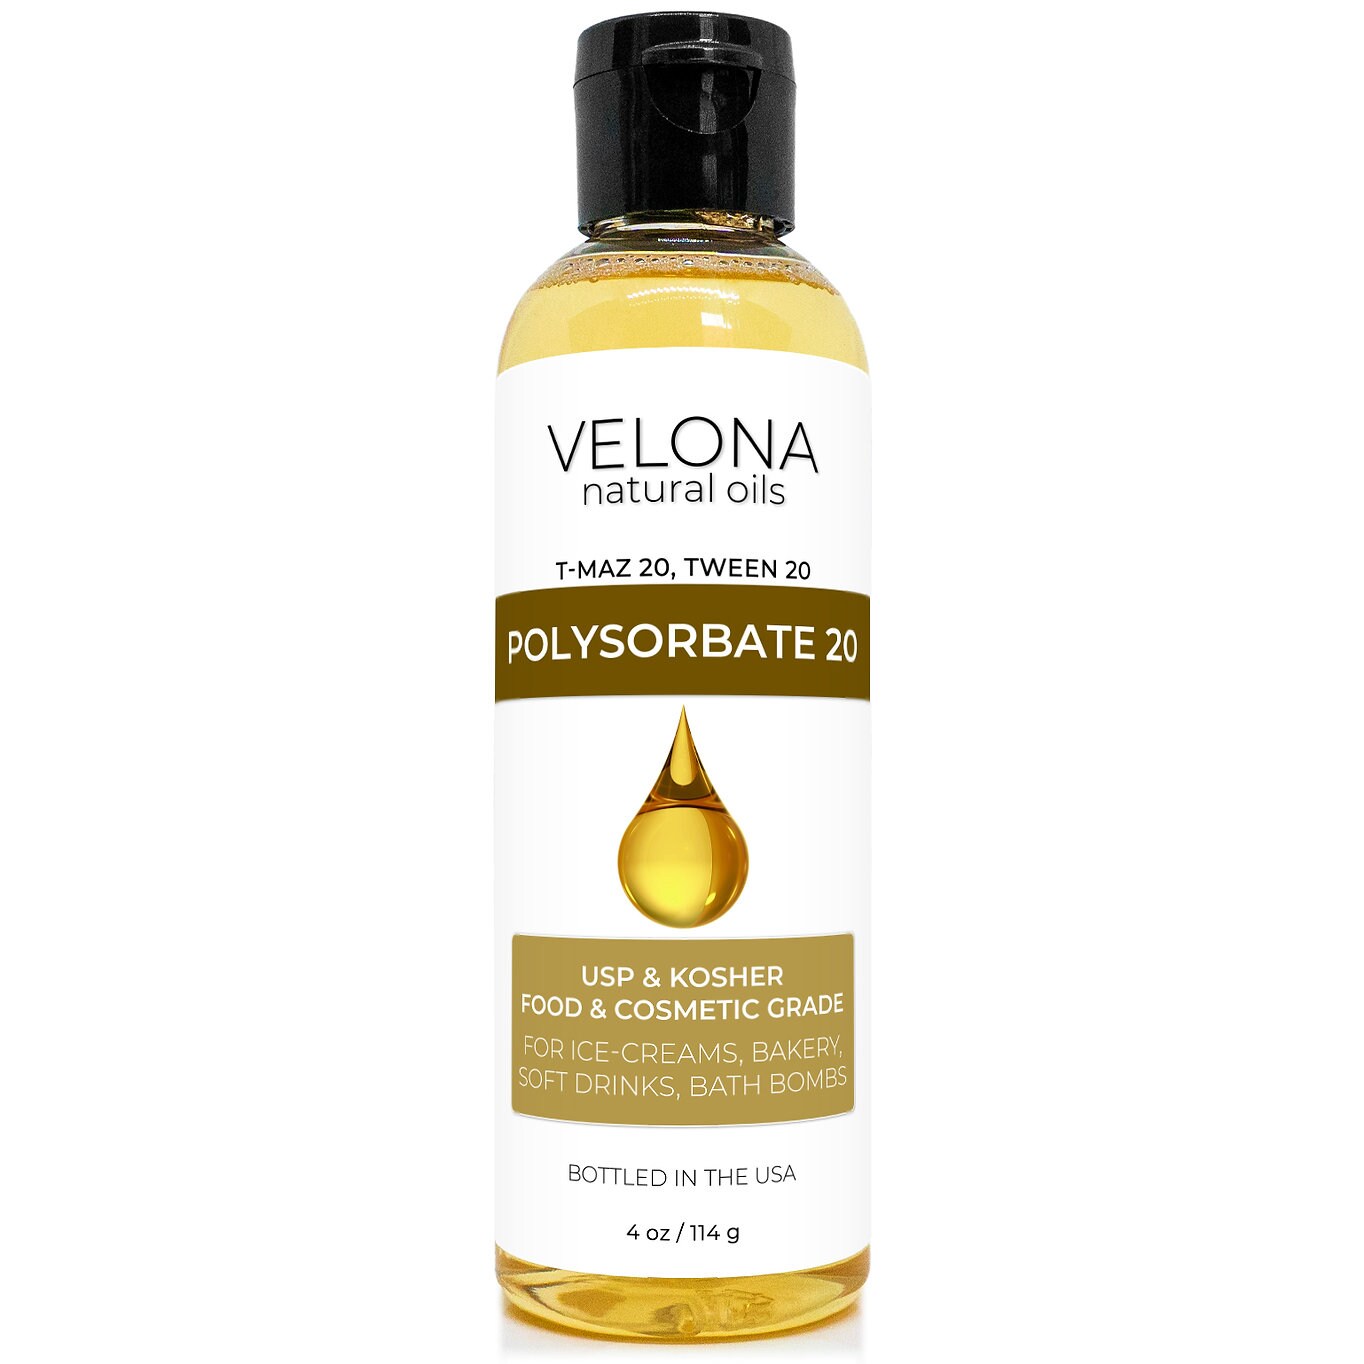 Polysorbate 20 by Velona - 4 oz | Solubilizer, Food &#x26; Cosmetic Grade | All Natural for Cooking, Skin Care and Bath Bombs | Use Today - Enjoy Results